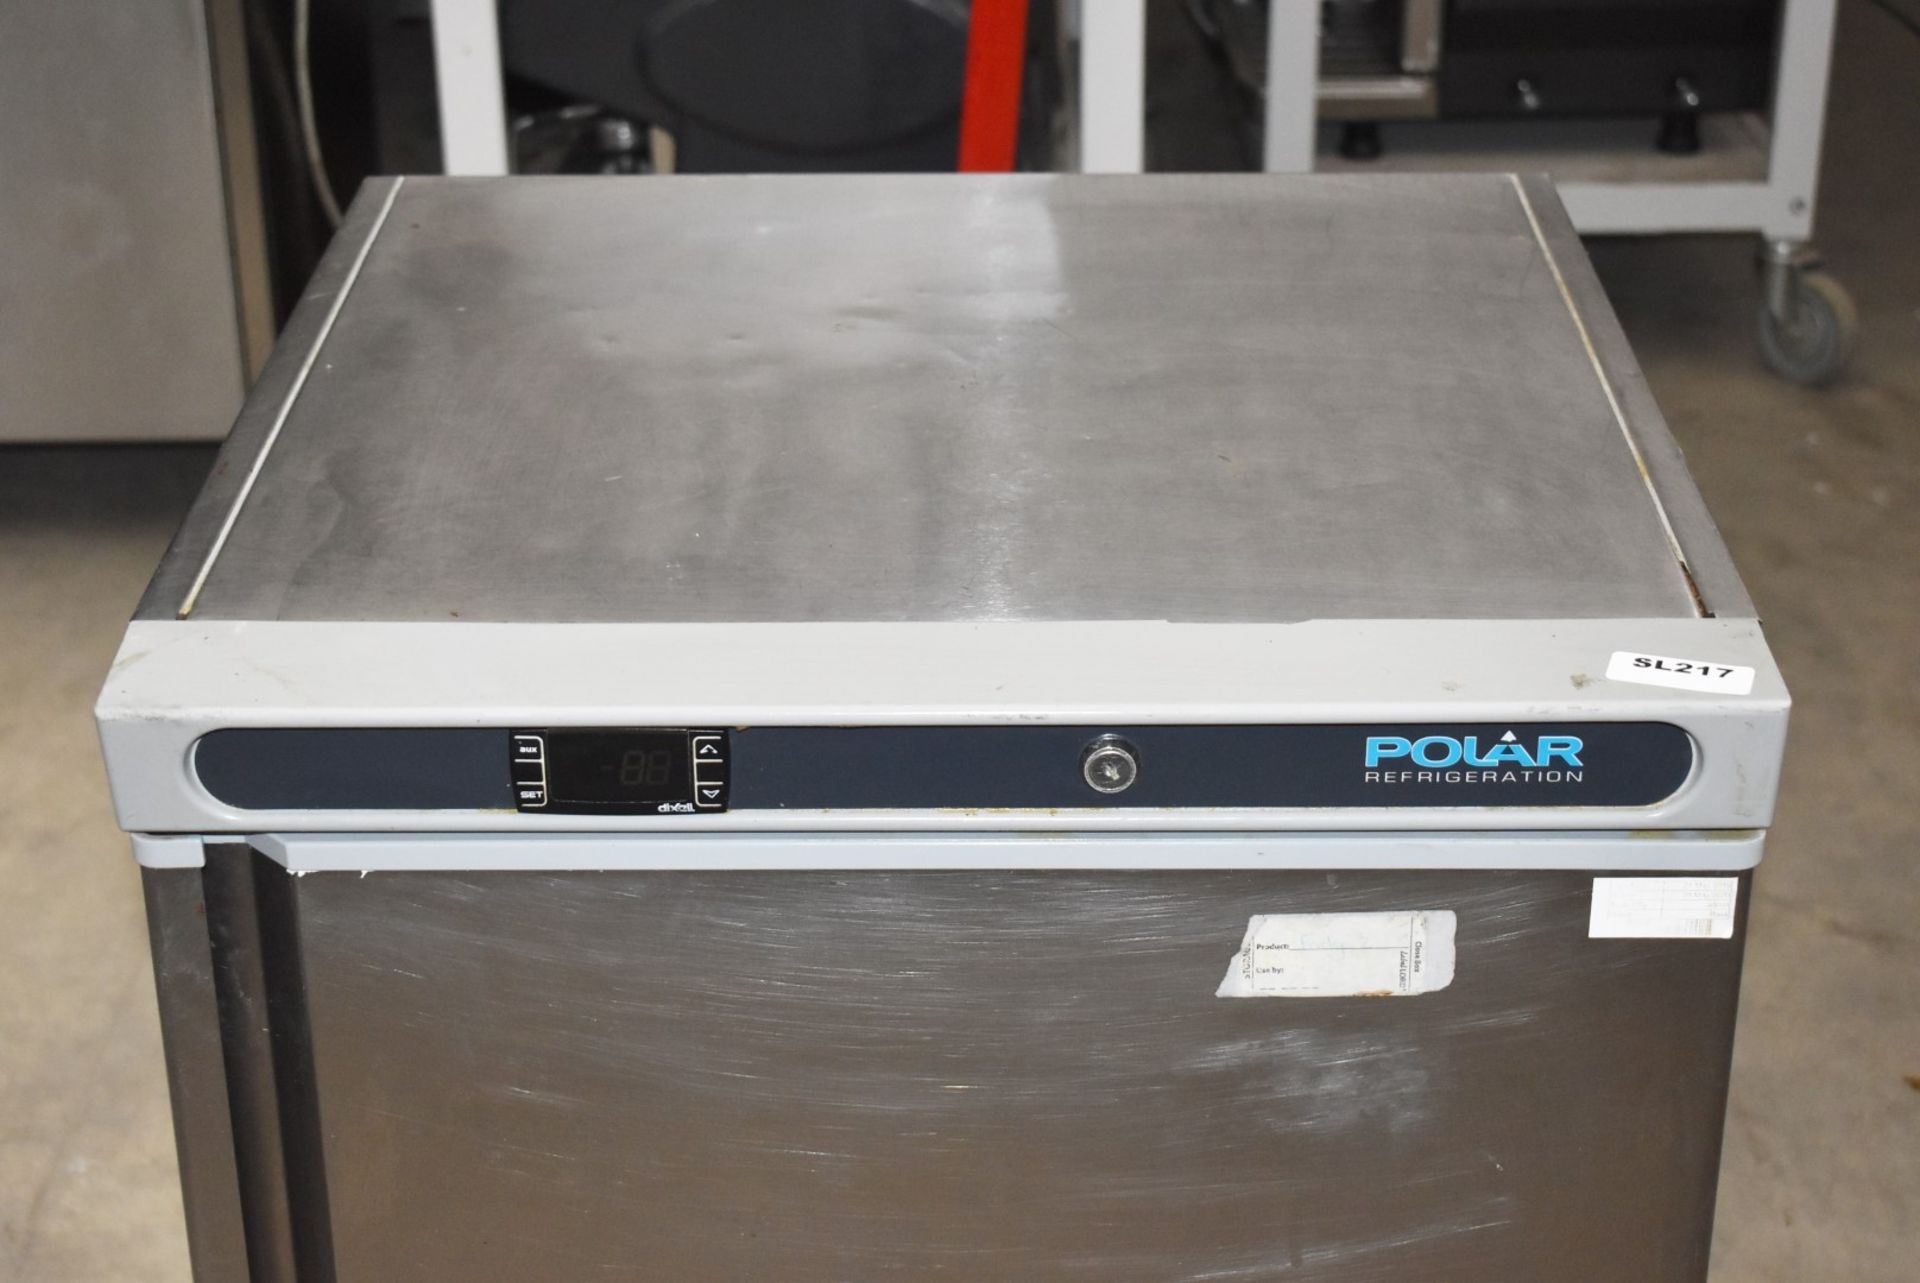 1 x Polar CD080 Undercounter Stainless Steel Fridge - Recently Removed From a Restaurant Environment - Image 2 of 7